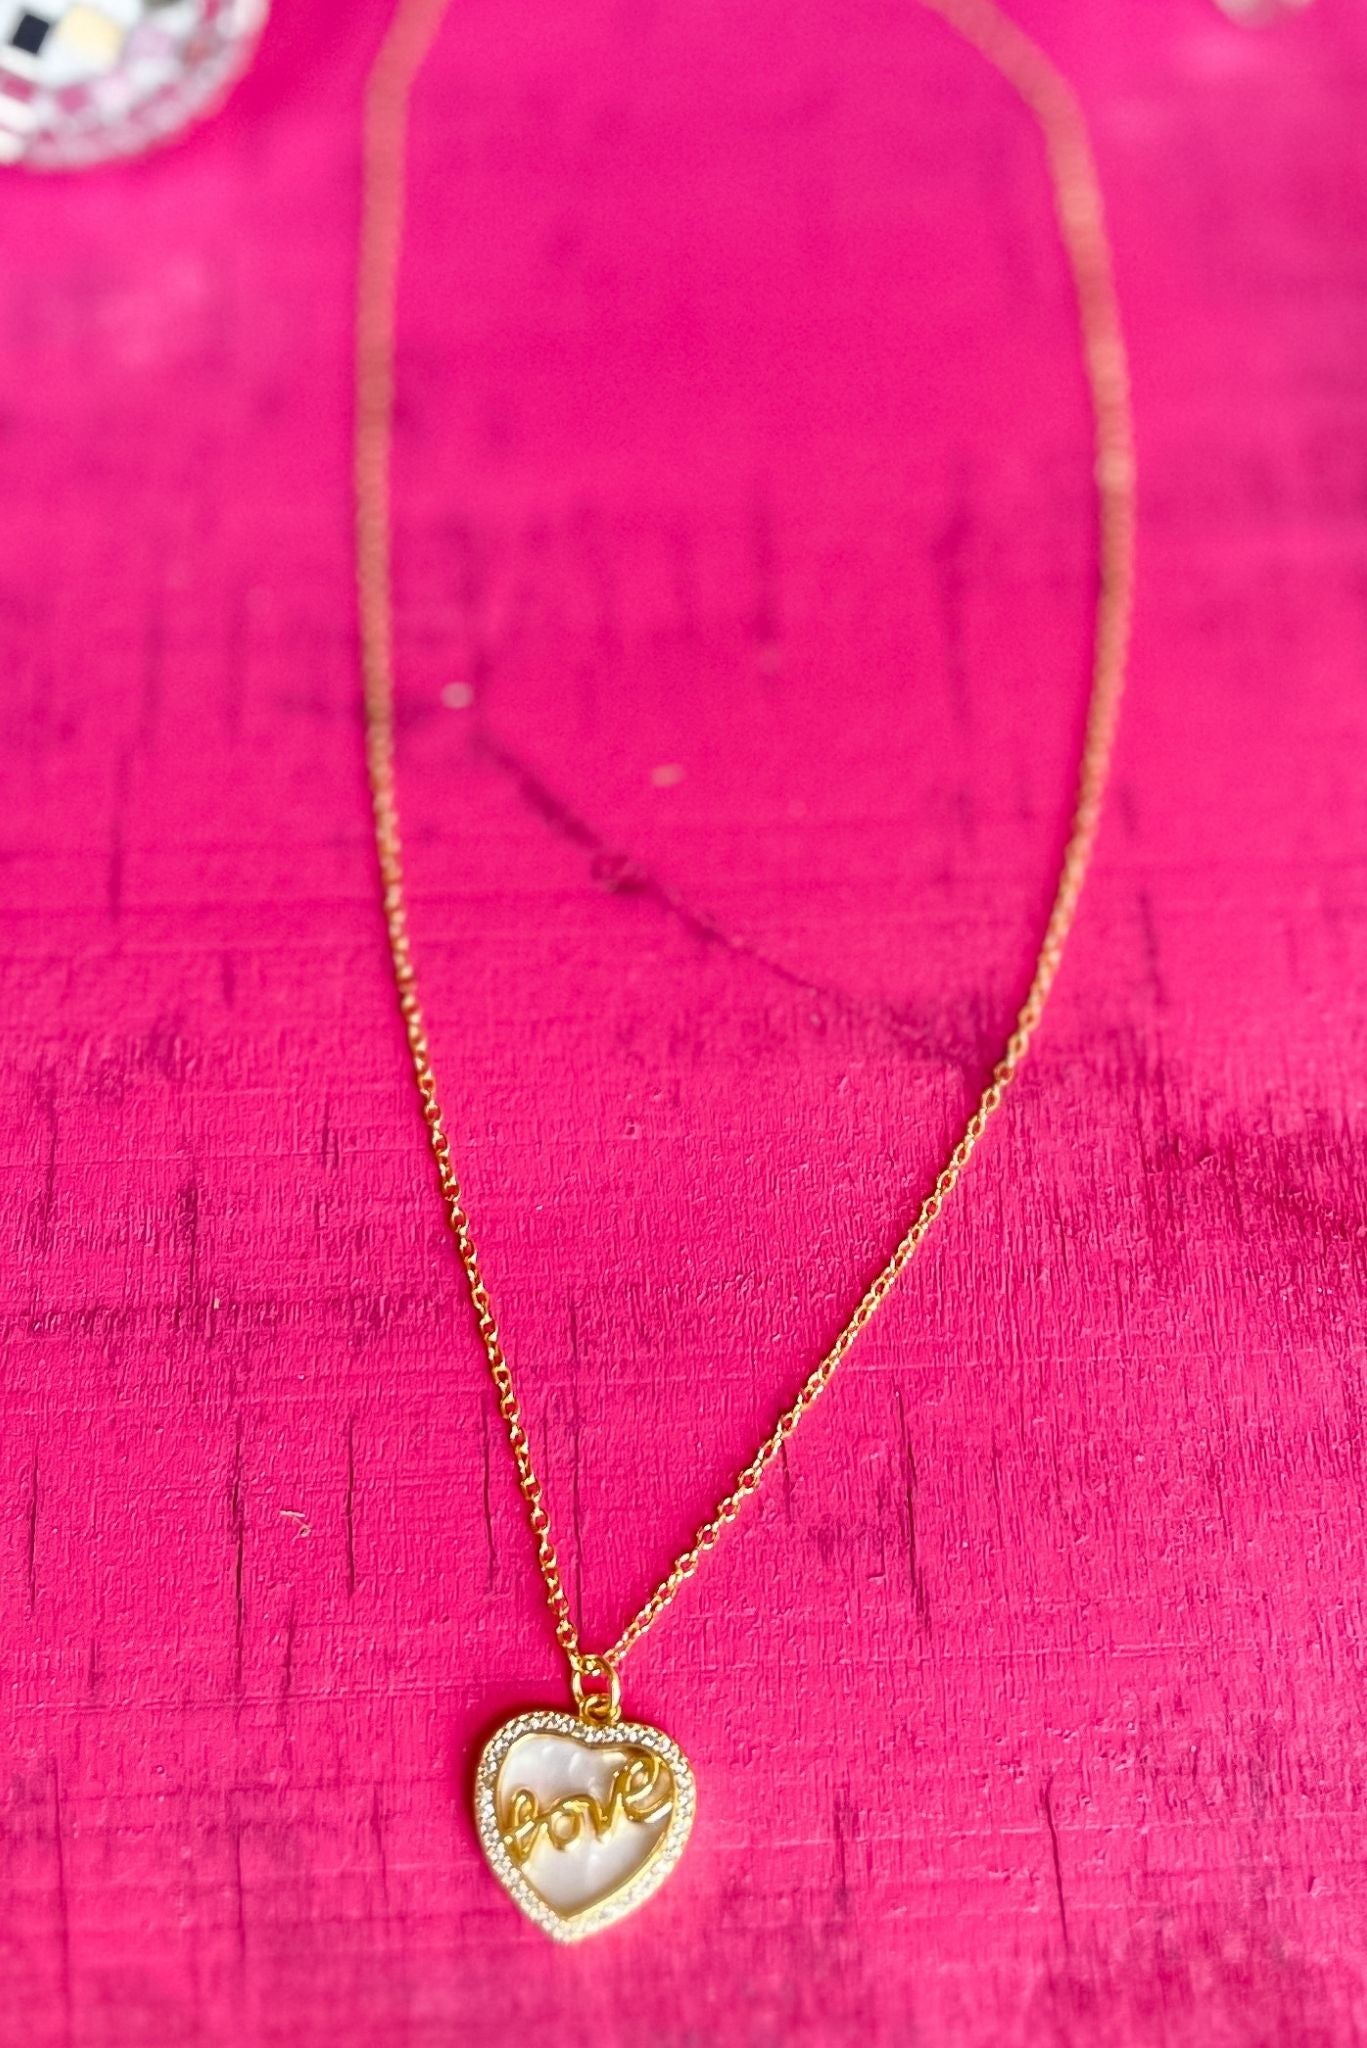 SSYS Gold Pearlescent Love Dainty Necklace